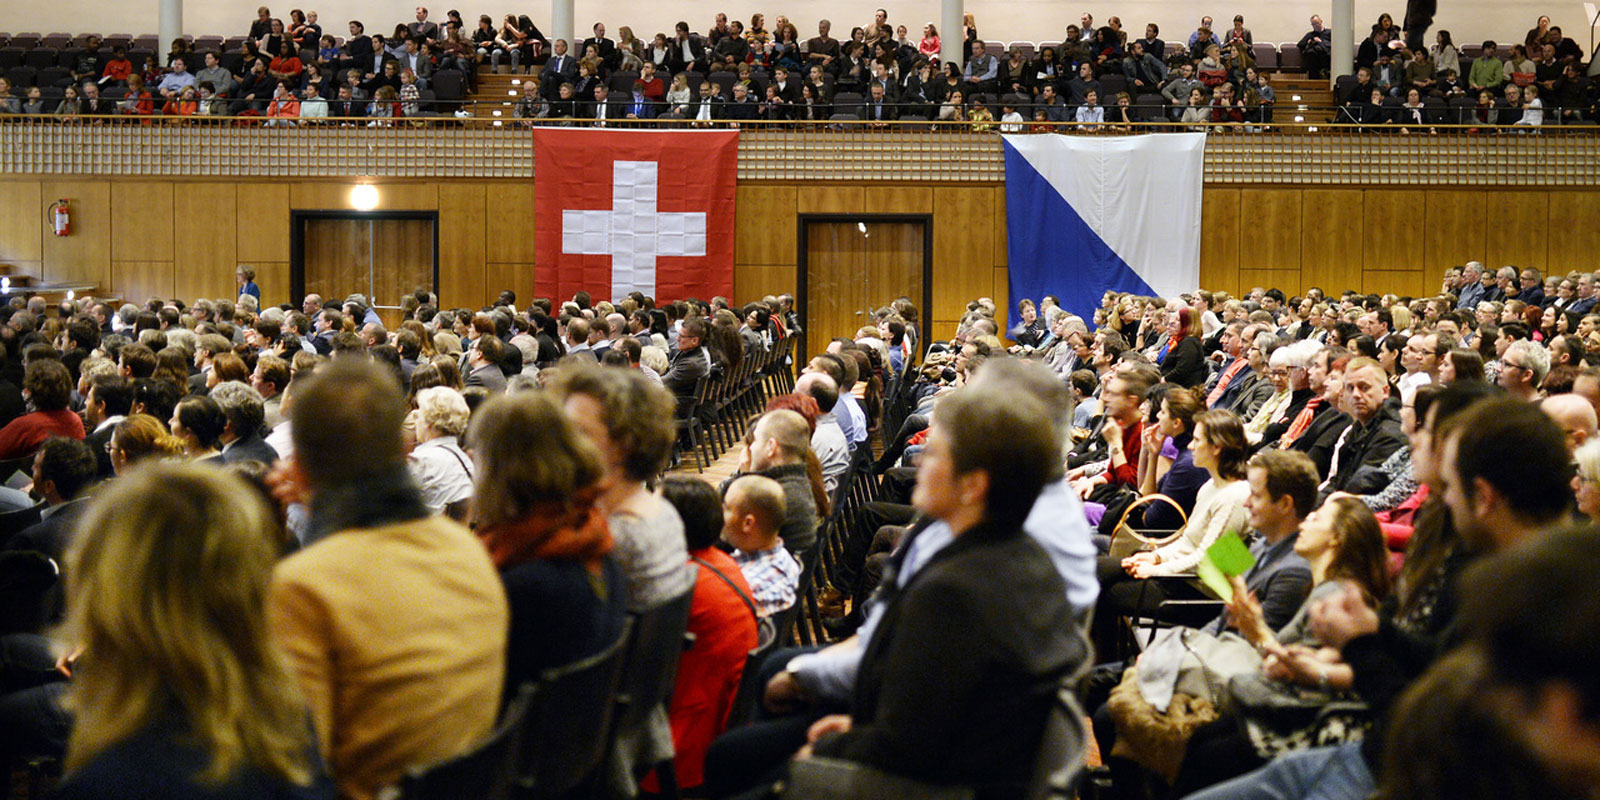 Enlarged view: Impressions from the Zurich naturalization ceremony in the Kongresshaus. According to a study by the Immigration Policy Lab, naturalization catalyzes integration. (Photo: Keystone / Walter Bieri)